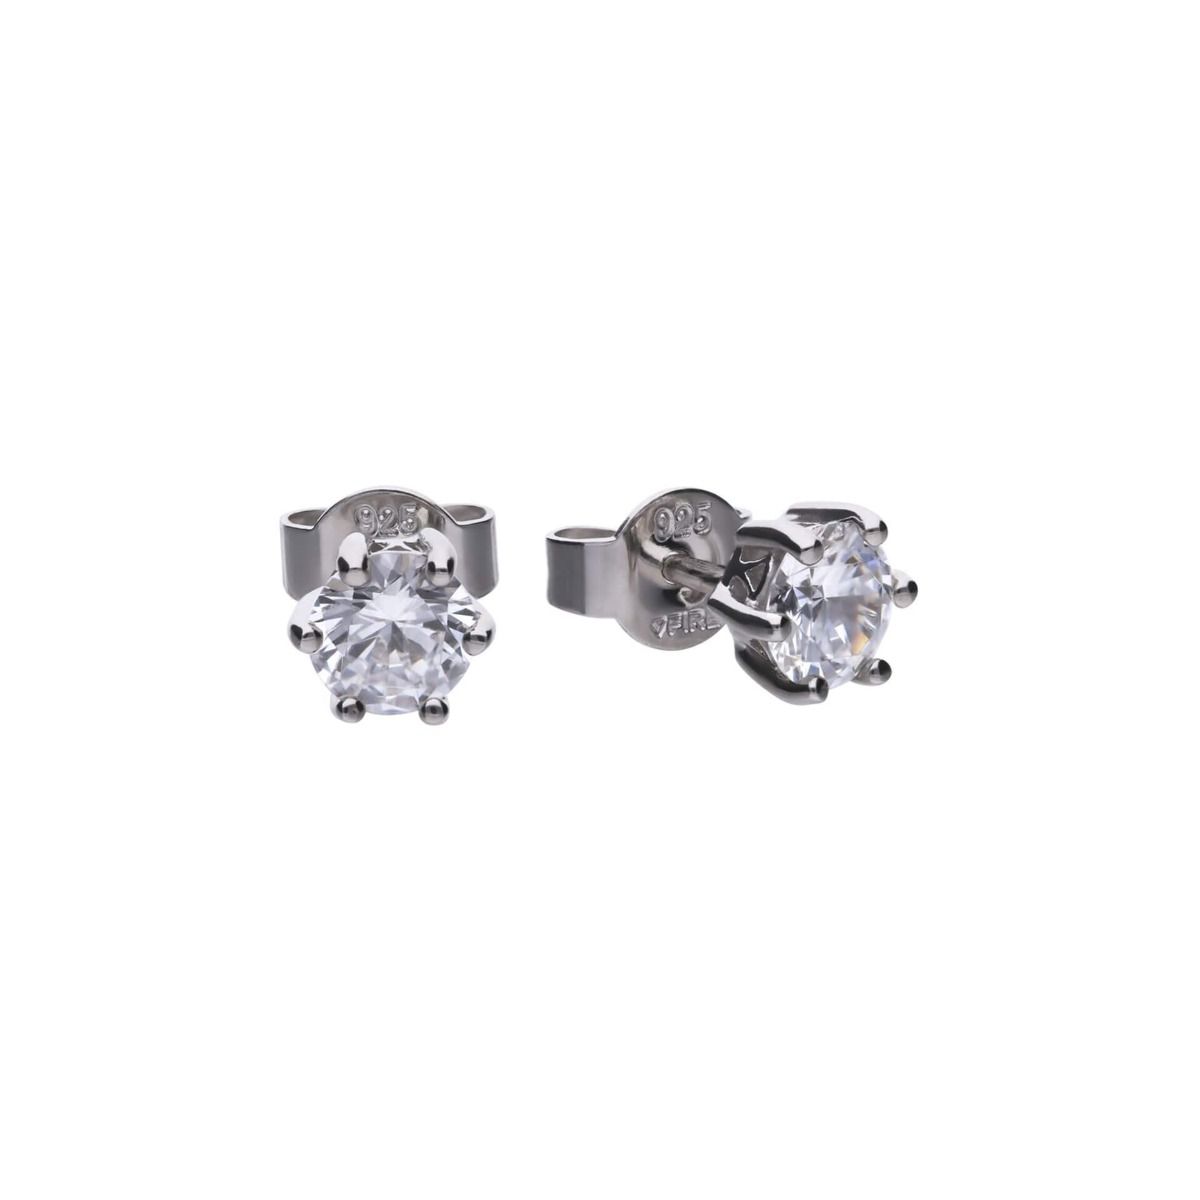 Diamonfire silver and cubic zirconia 6 claw stud earrings 2.00ct